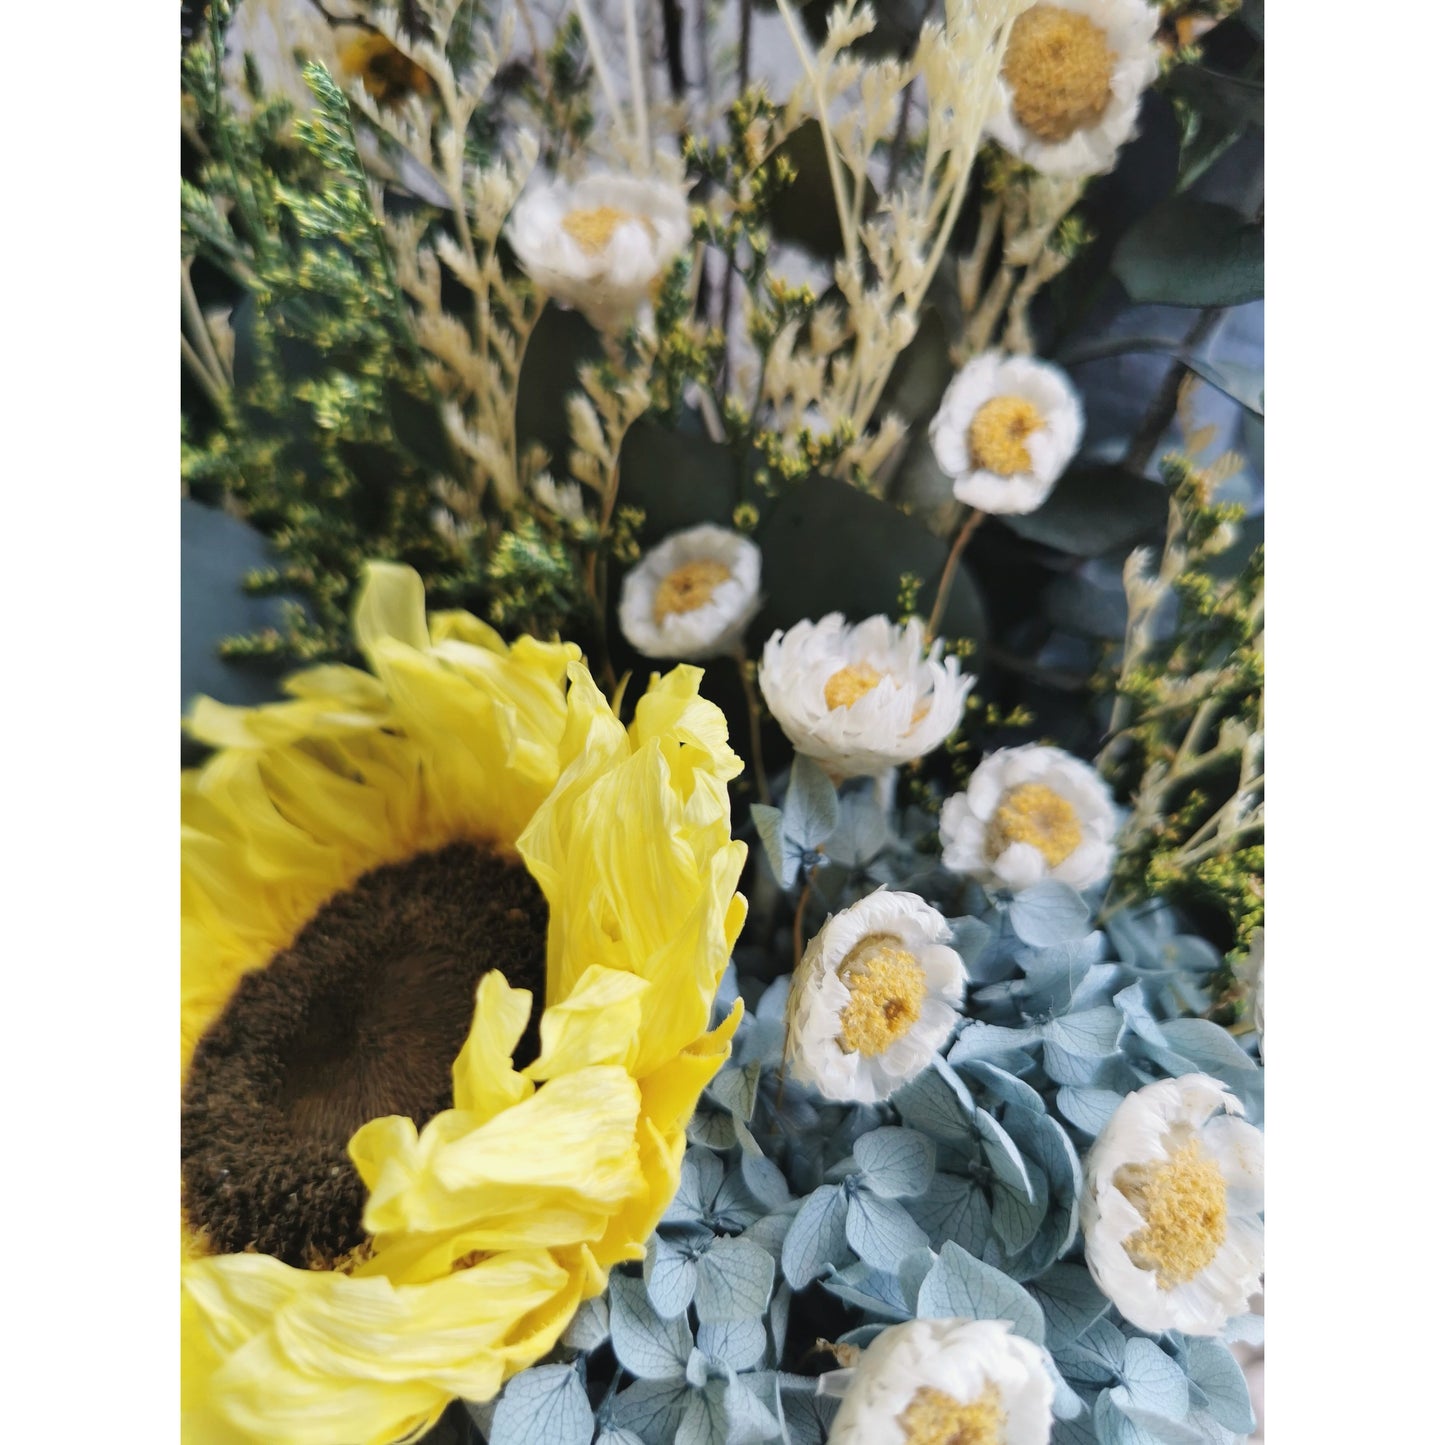 Dried & Preserved flower arrangement featuring a preserved yellow sunflower and yellow daisies and lush greenery and set in to a white pot. Photo shows a zoomed in up close photo of the flowers